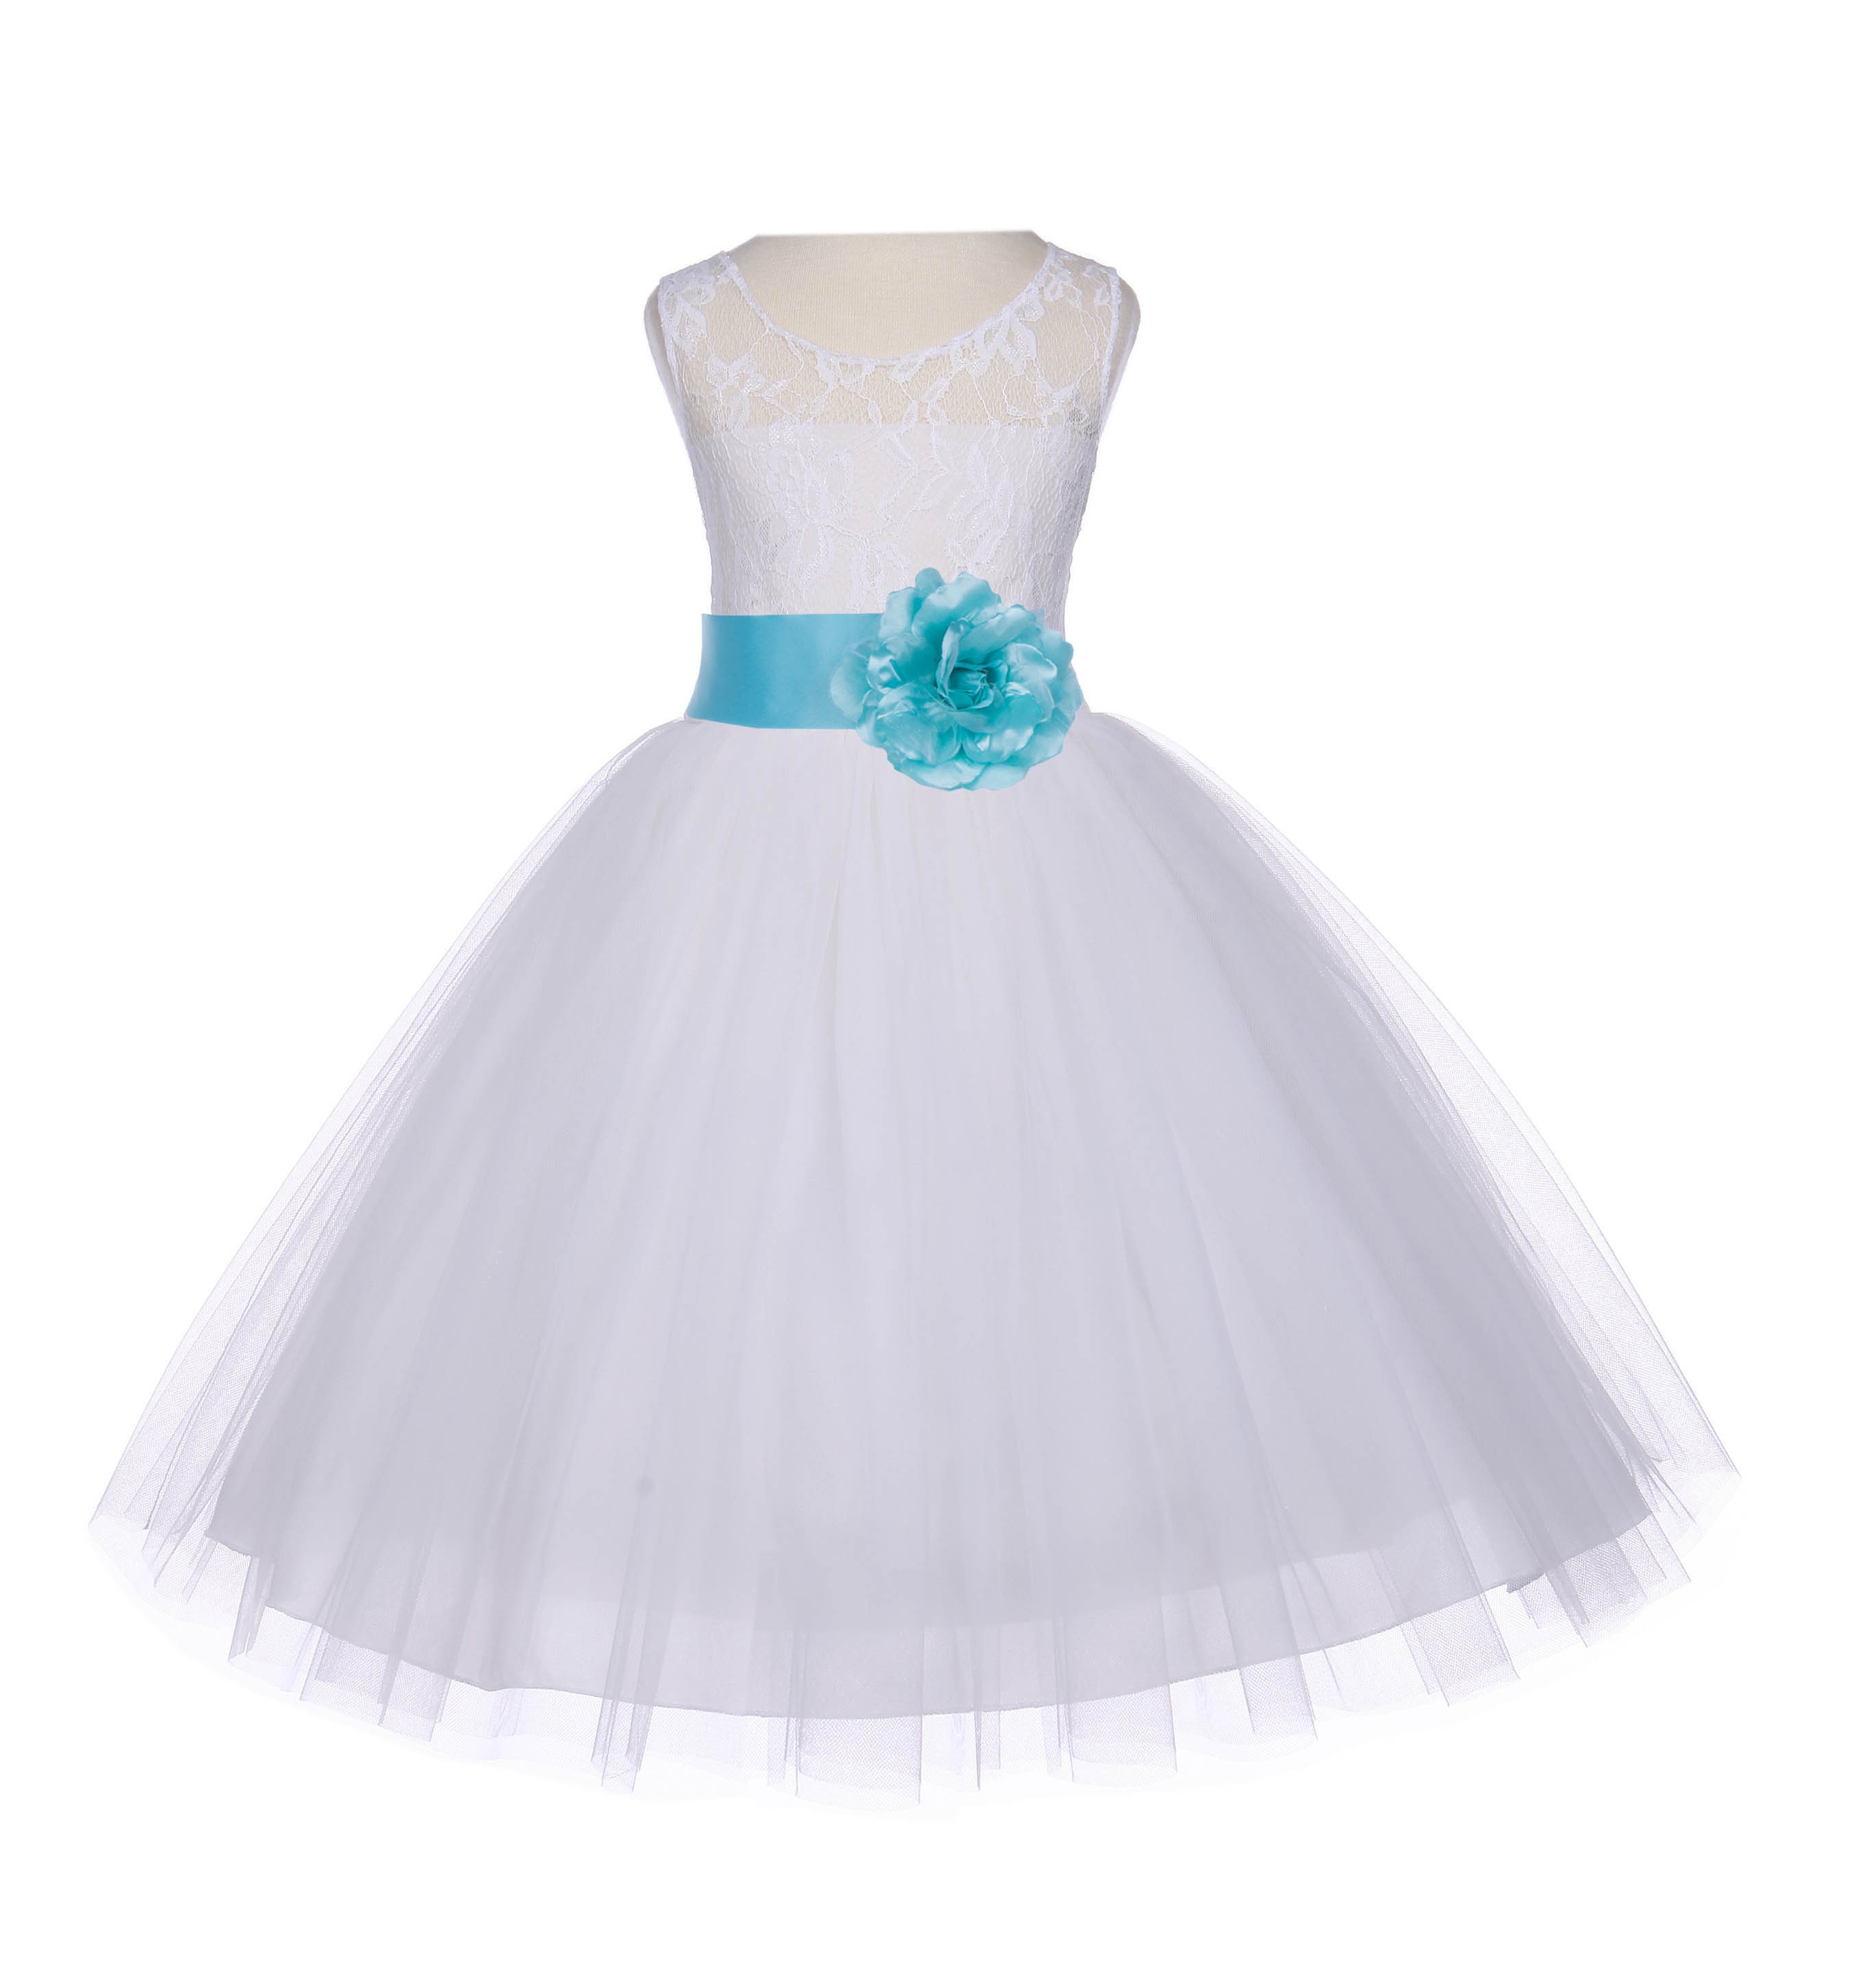 Ivory/Spa Floral Lace Bodice Tulle Flower Girl Dress Bridesmaid 153S